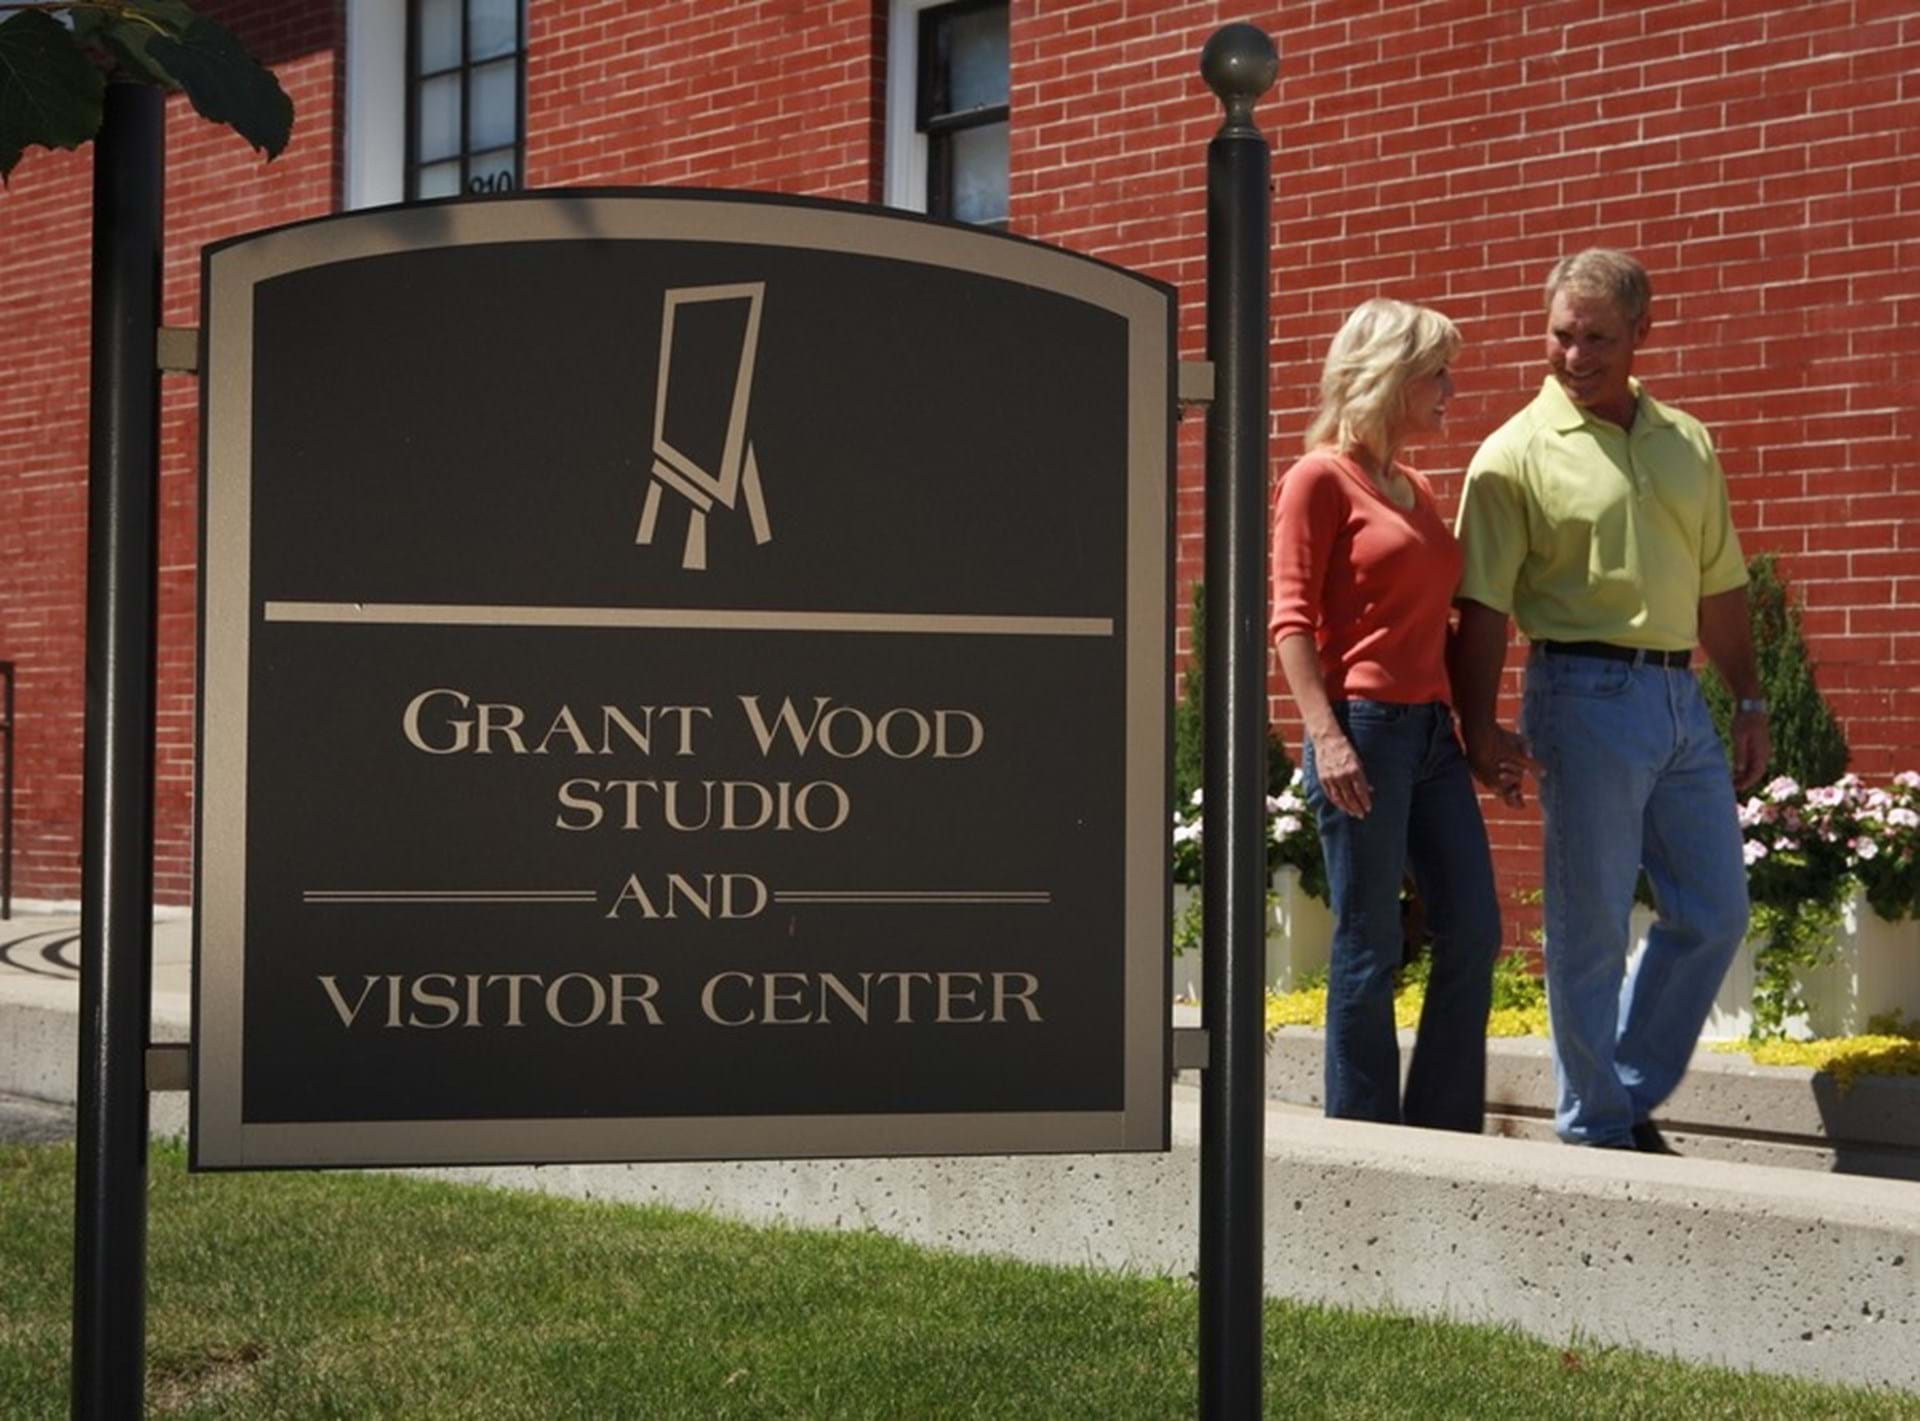 Grant Wood Studio and Visitor Center